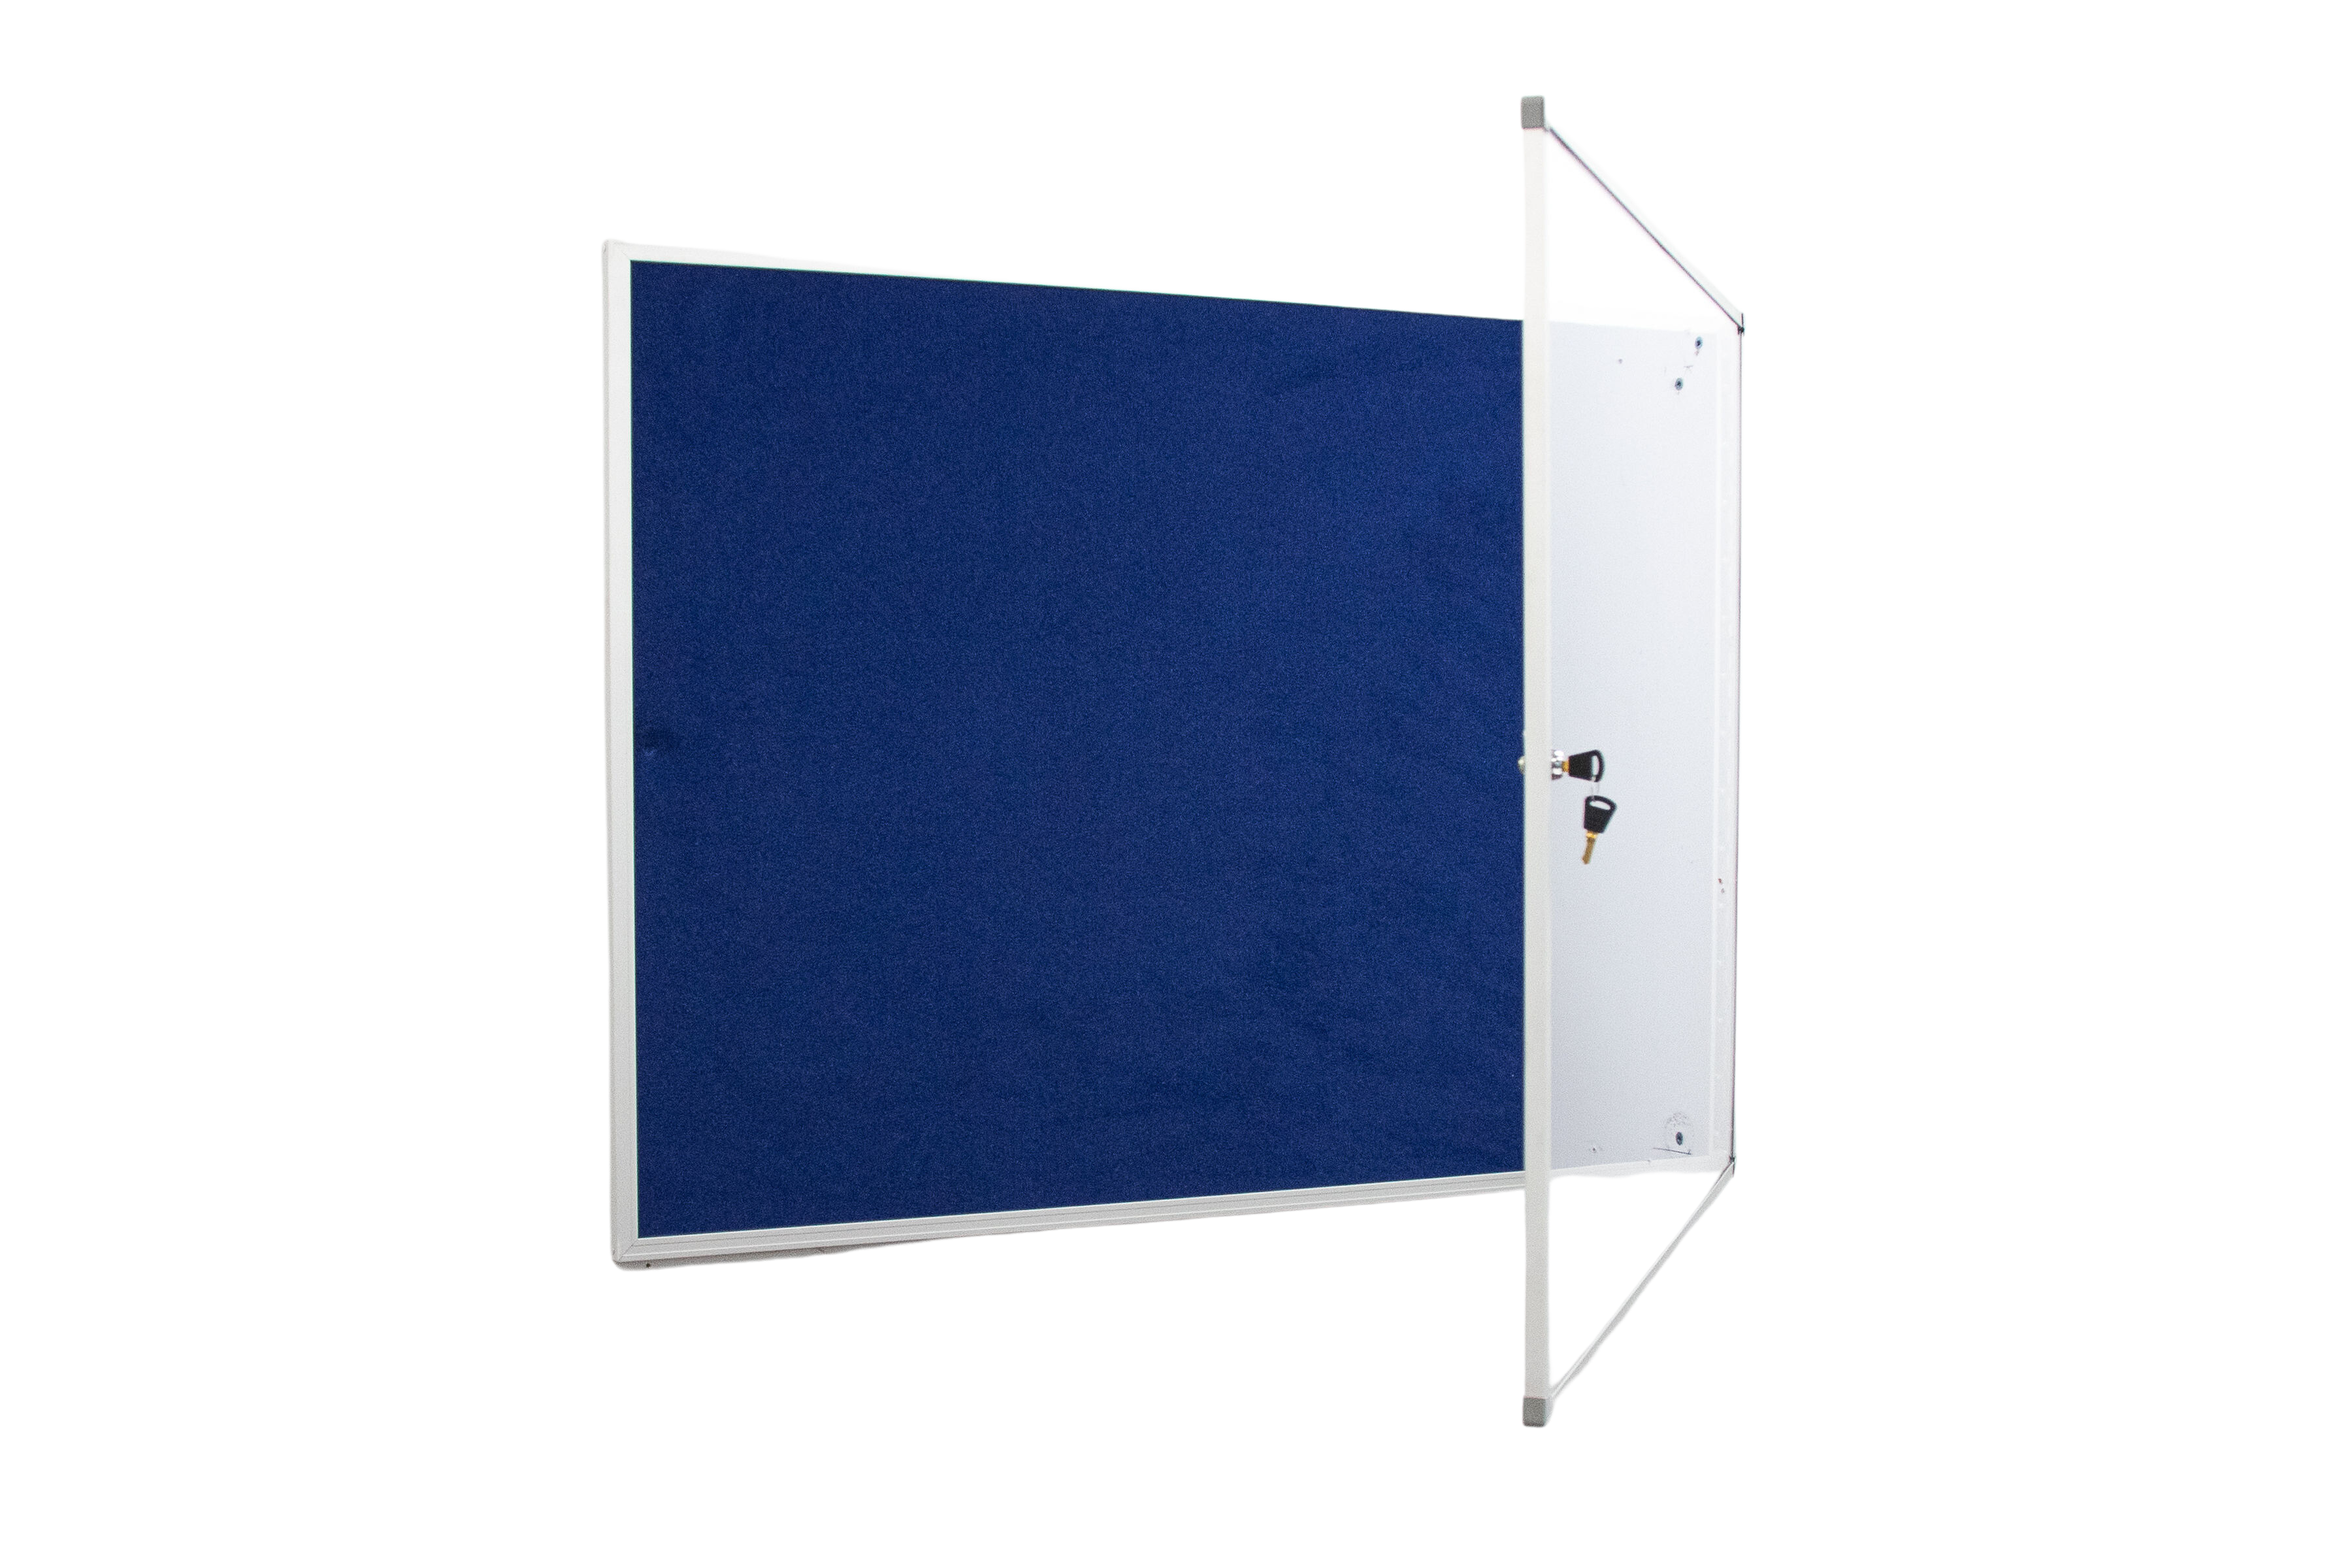 Single Door Clear Acrylic-Fronted Noticeboards Protect your pinned documents from interference and the elements with a key-locked clear acrylic door. Acrylic is both strong and flexible, making it a great safety option. Hinges are discretely concealed for a streamlined appearance. Ideal for single sheets of paper. Picture 1-7 : Single Door Clear Acrylic-Fronted Noticeboard Colour Ink